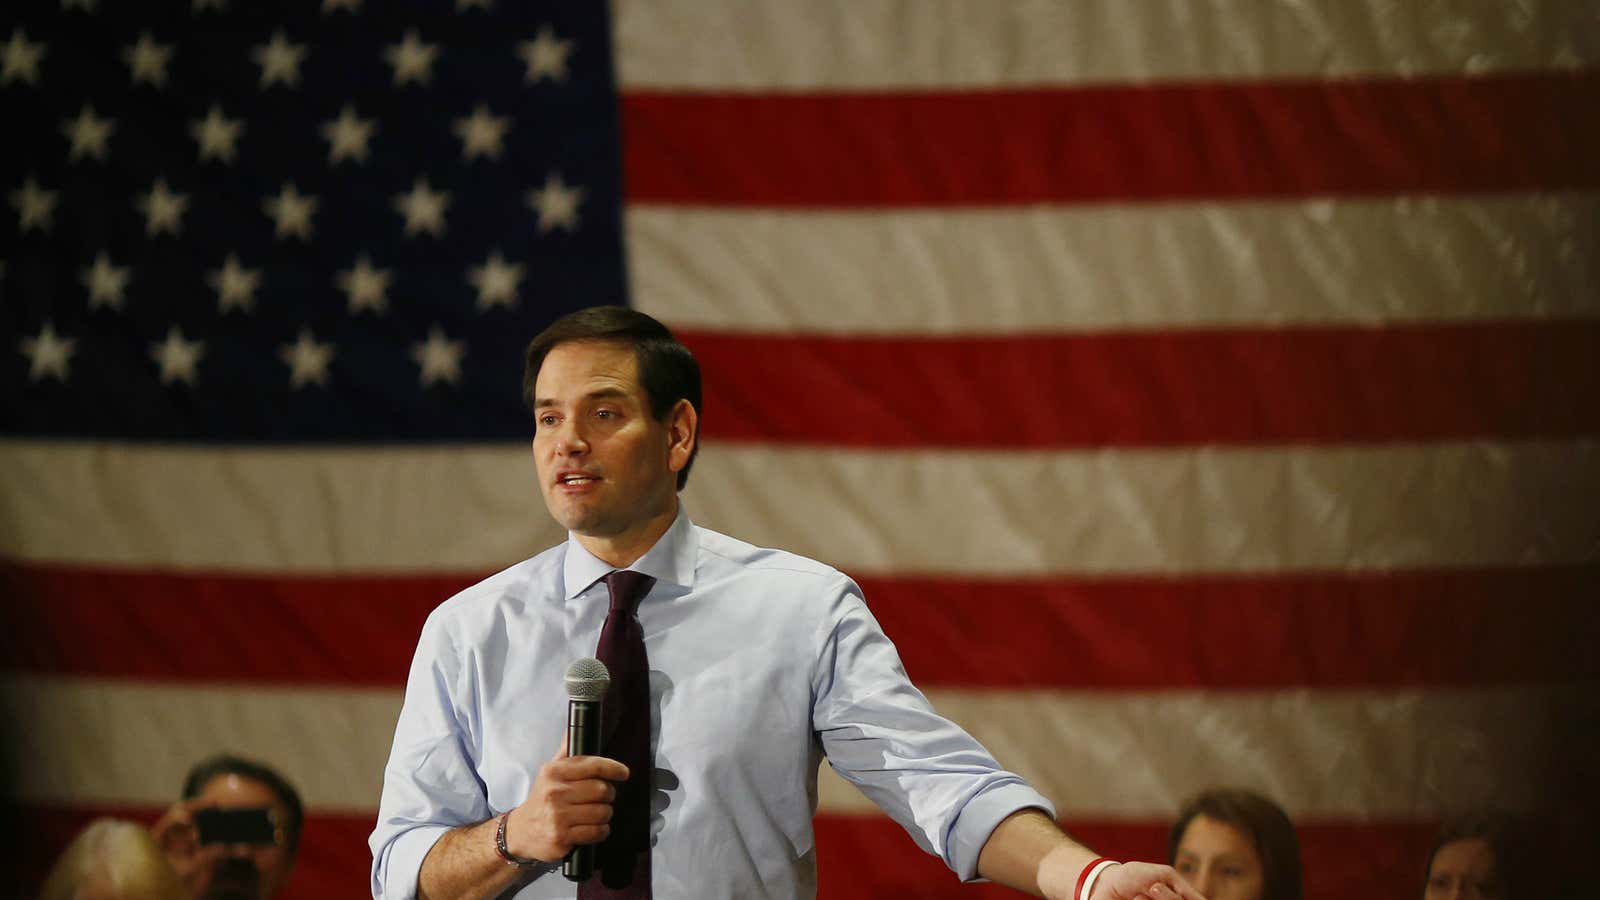 Can Rubio’s big third-place win in Iowa help him oust Cruz and Trump?